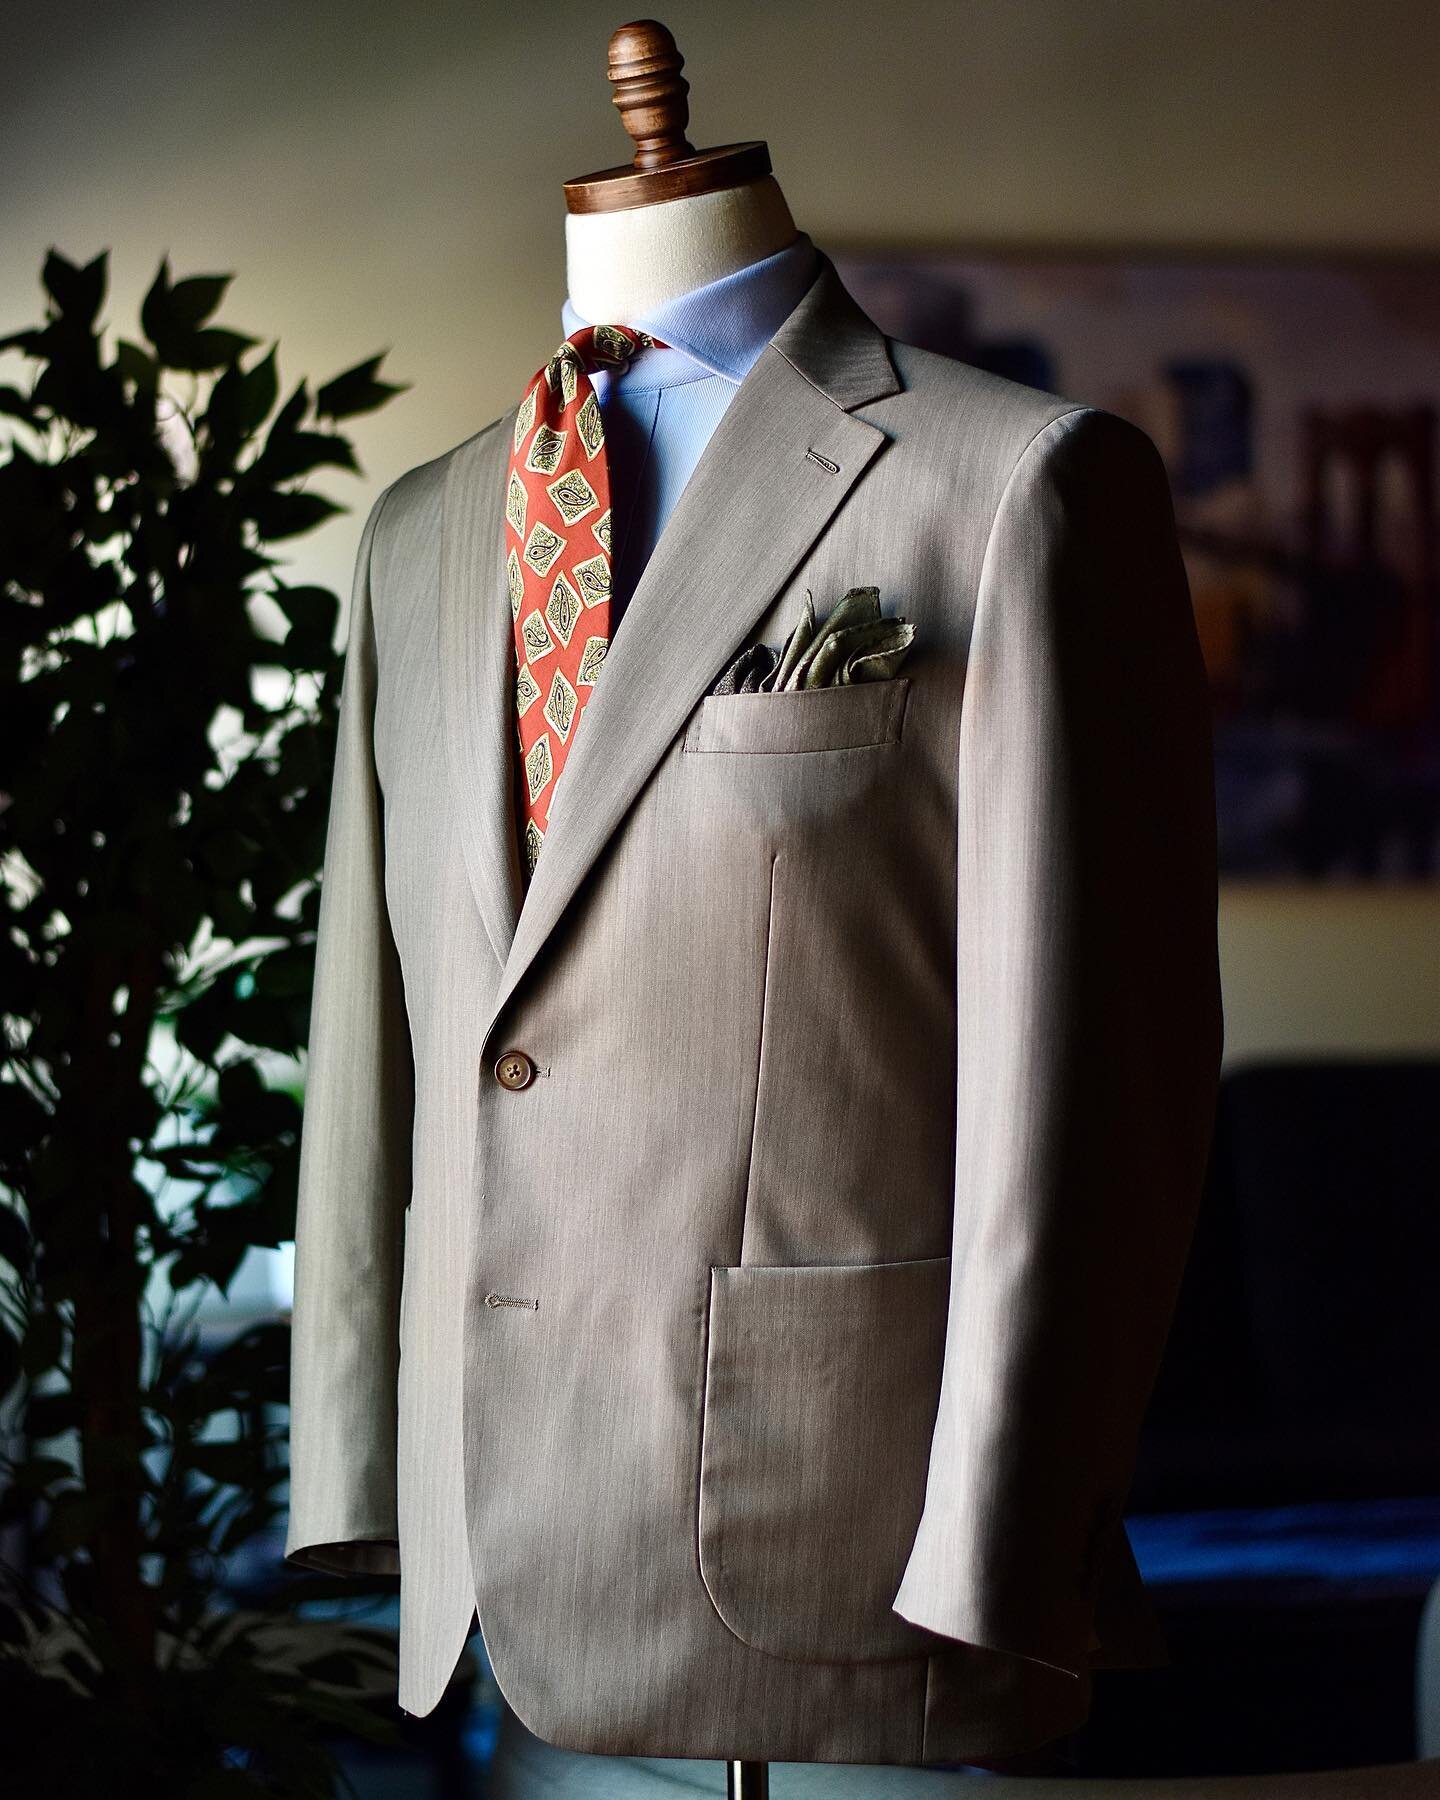 Spring is here and this beautiful tan herringbone suit is the perfect transition into summer! Paired with a pop of orange and green this outfit is 👌🏽

#ascendcollection #suits #customsuits #menswear #mensstyle #style #spring #easter #durham #raleig